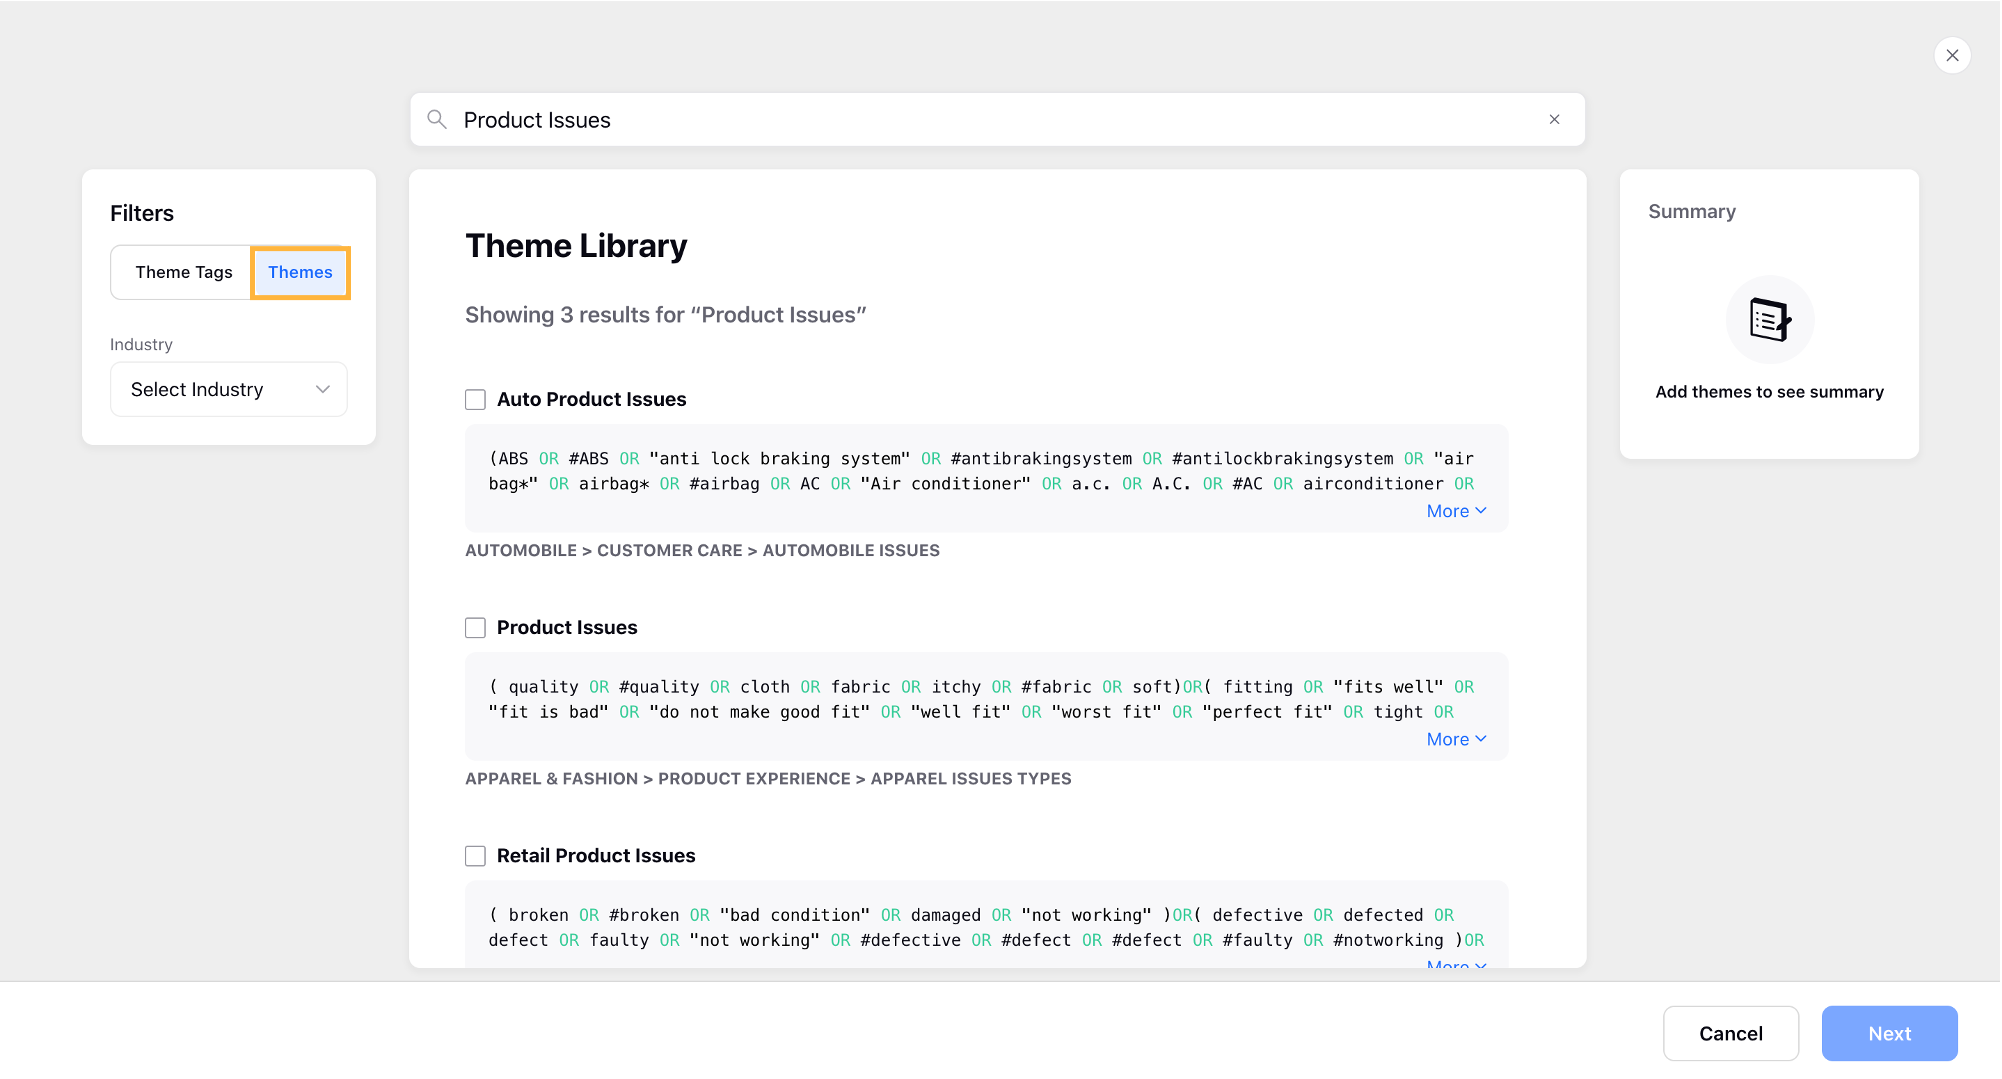 Filter the searched themes by Themes